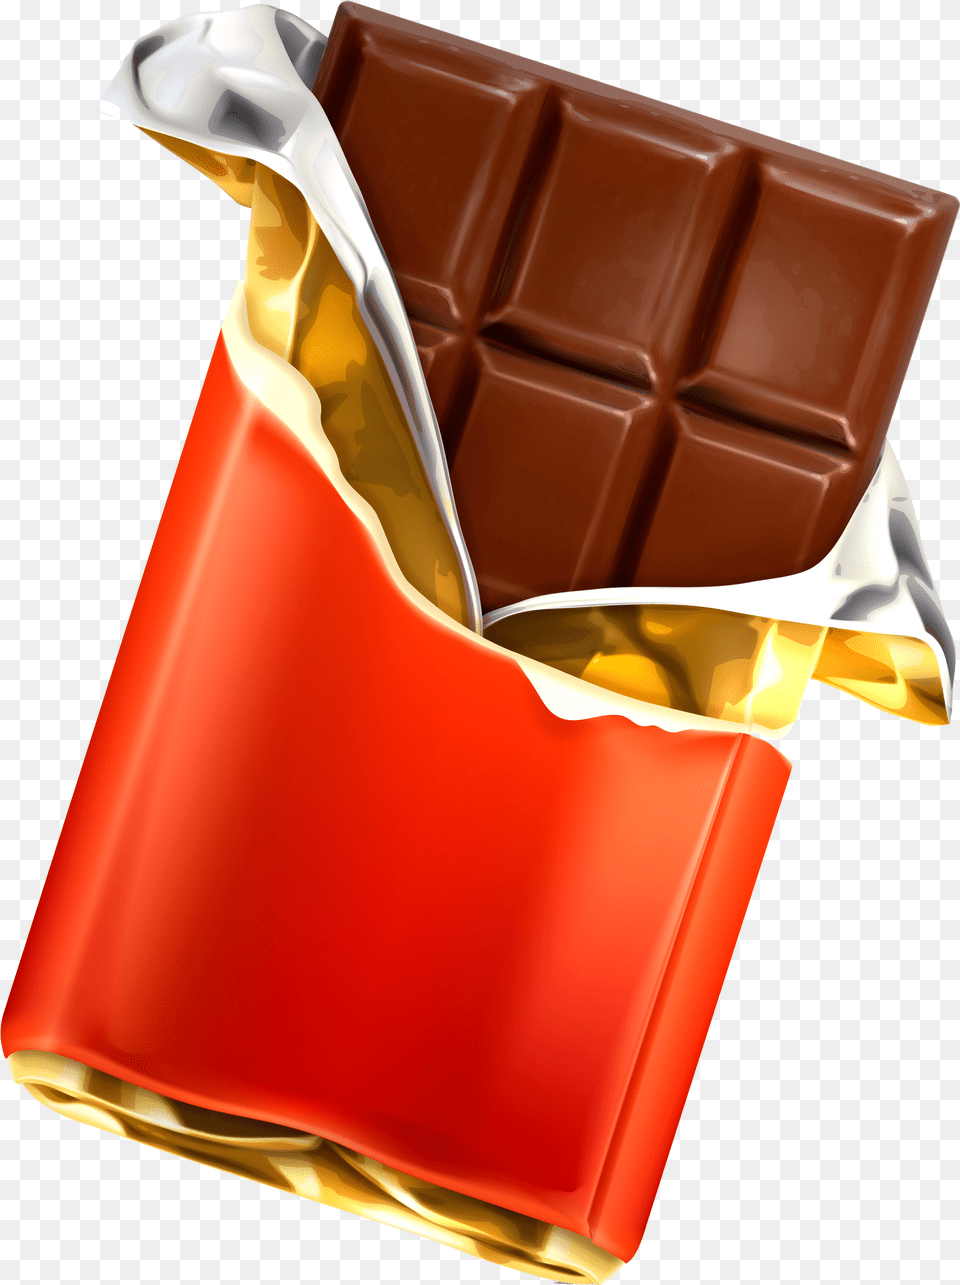 Chocolate Clipart Image With No Chocolate Clipart, Food, Sweets, Dessert, Caramel Png